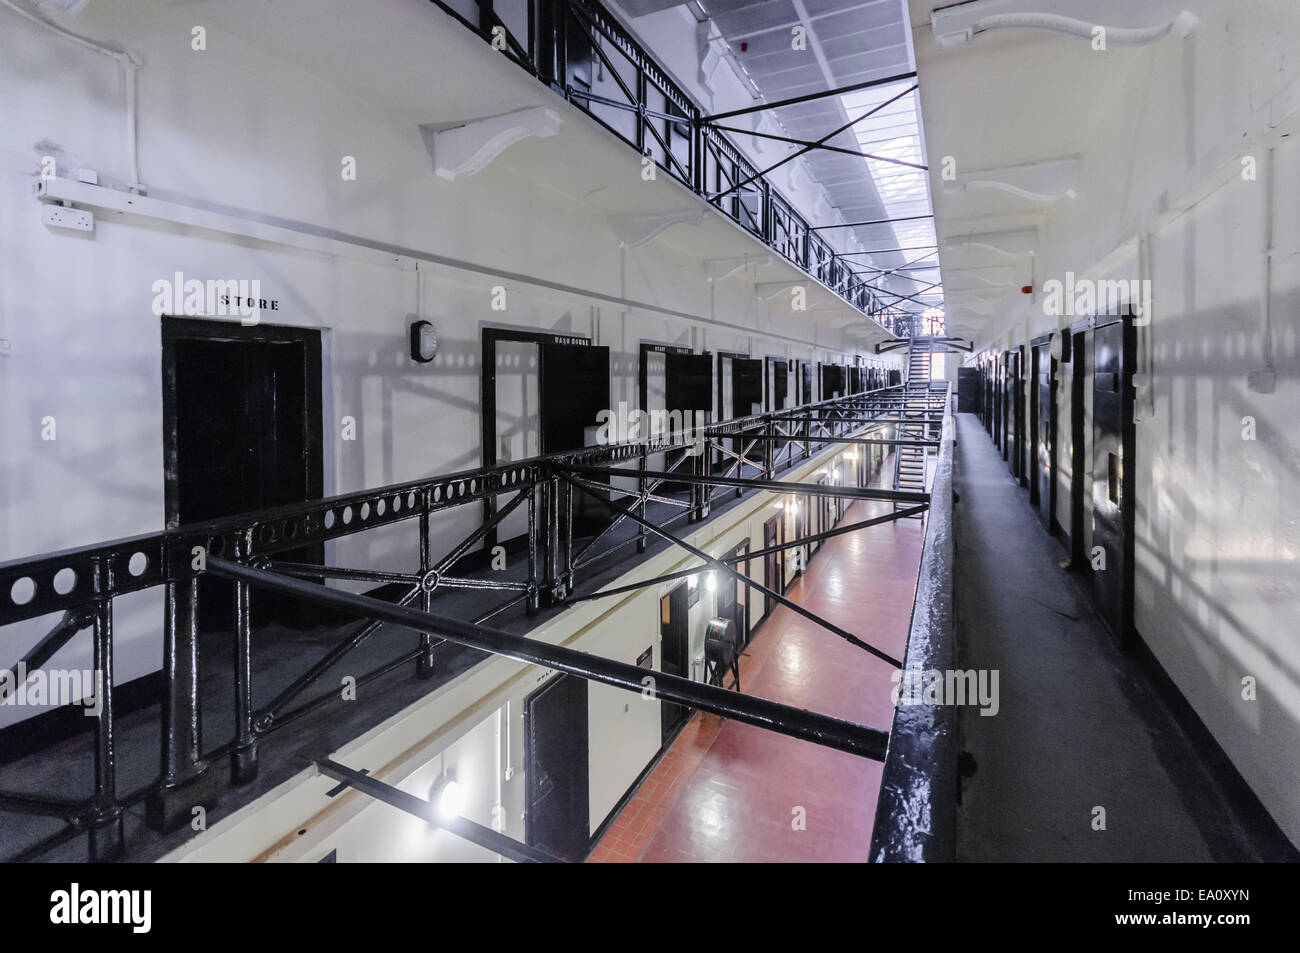 Cells and landing in the Crumlin Road Gaol, a Victorian built prison. Stock Photo